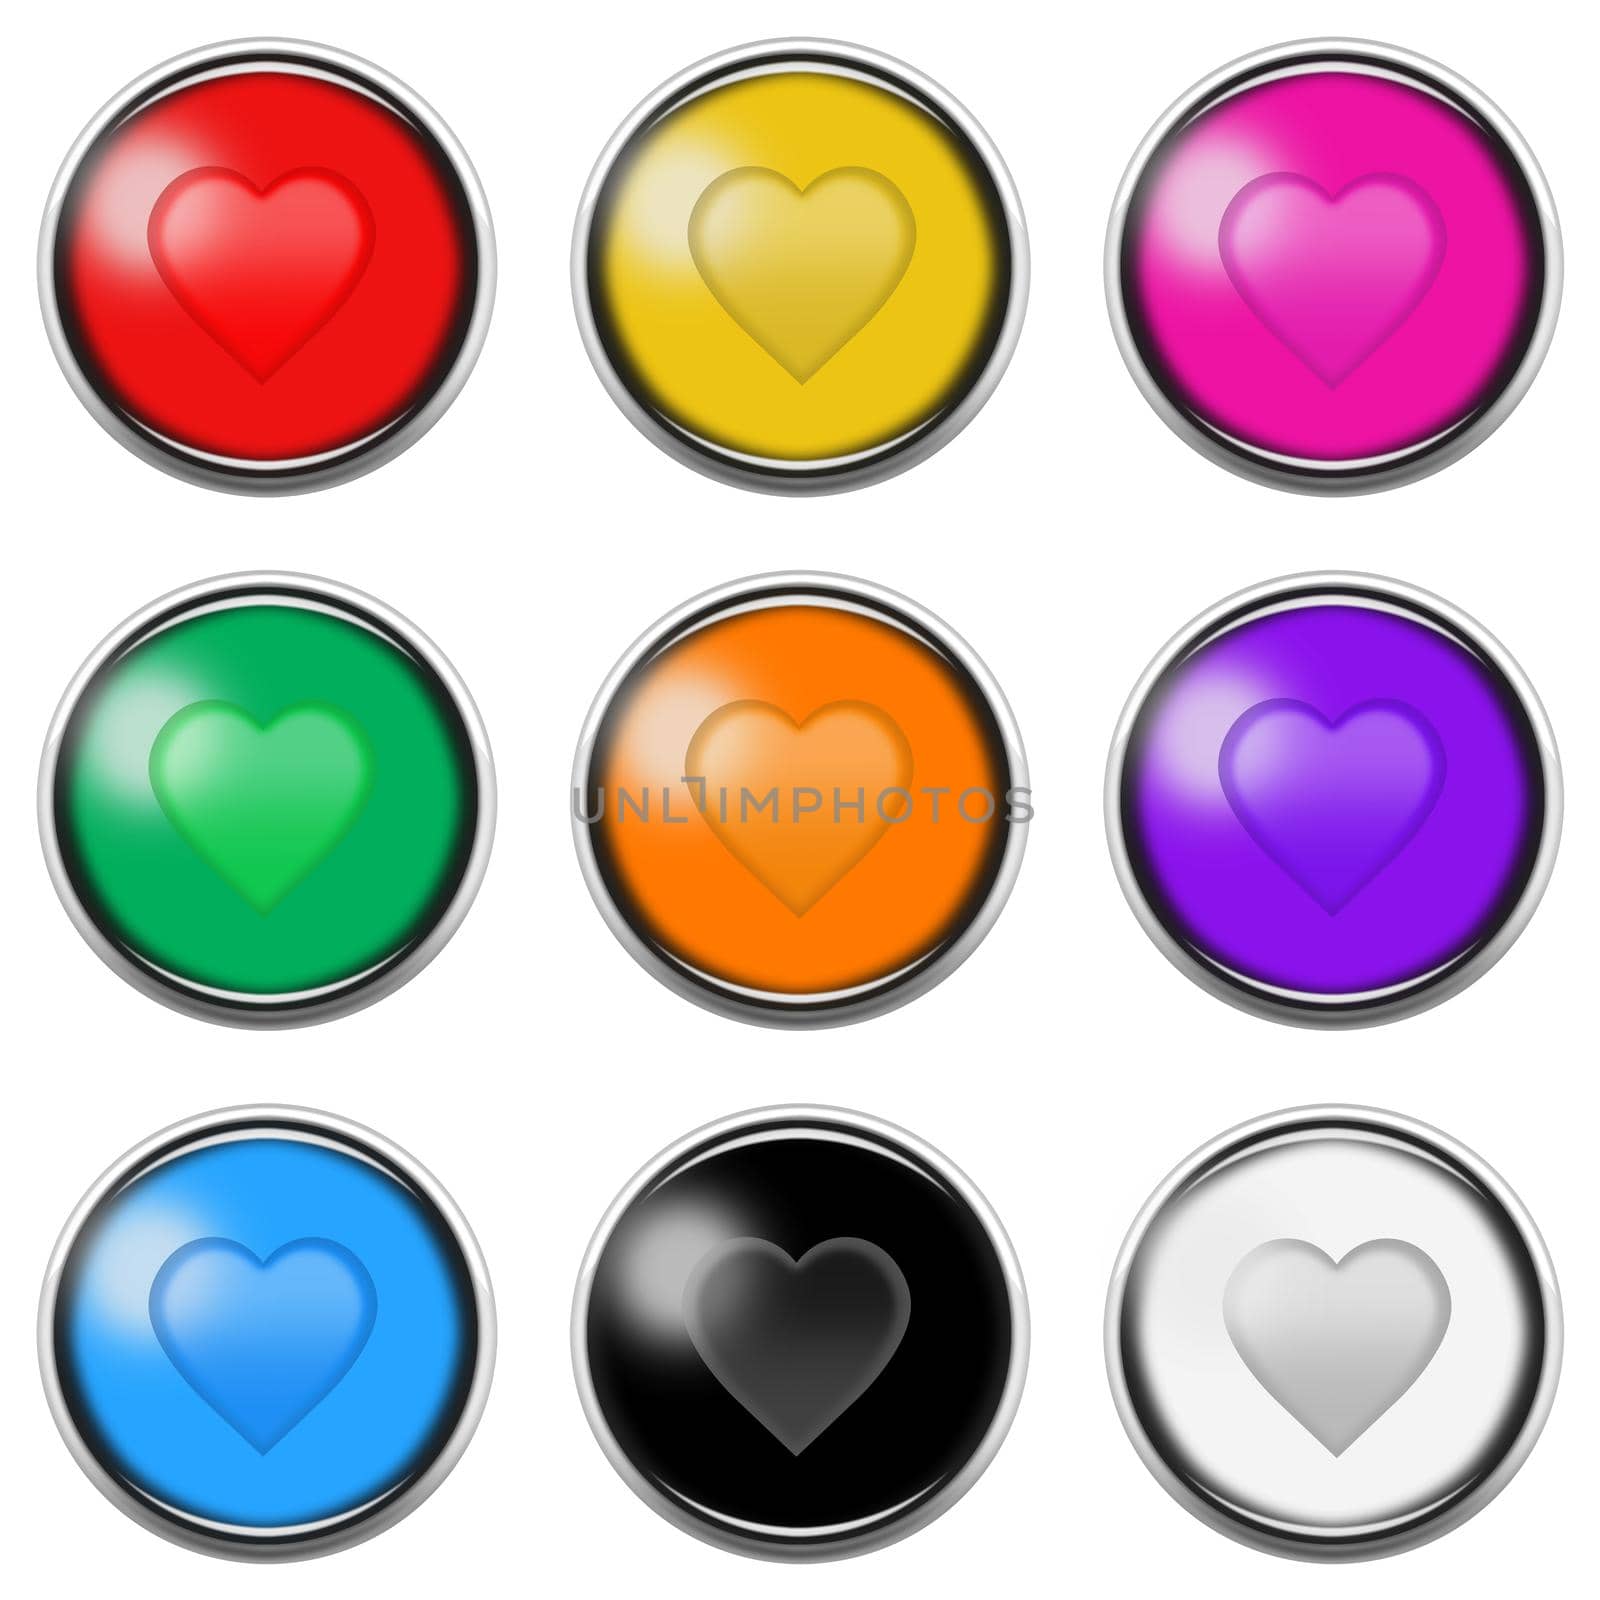 Heart sign button icon set isolated on white with clipping path 3d illustration by VivacityImages